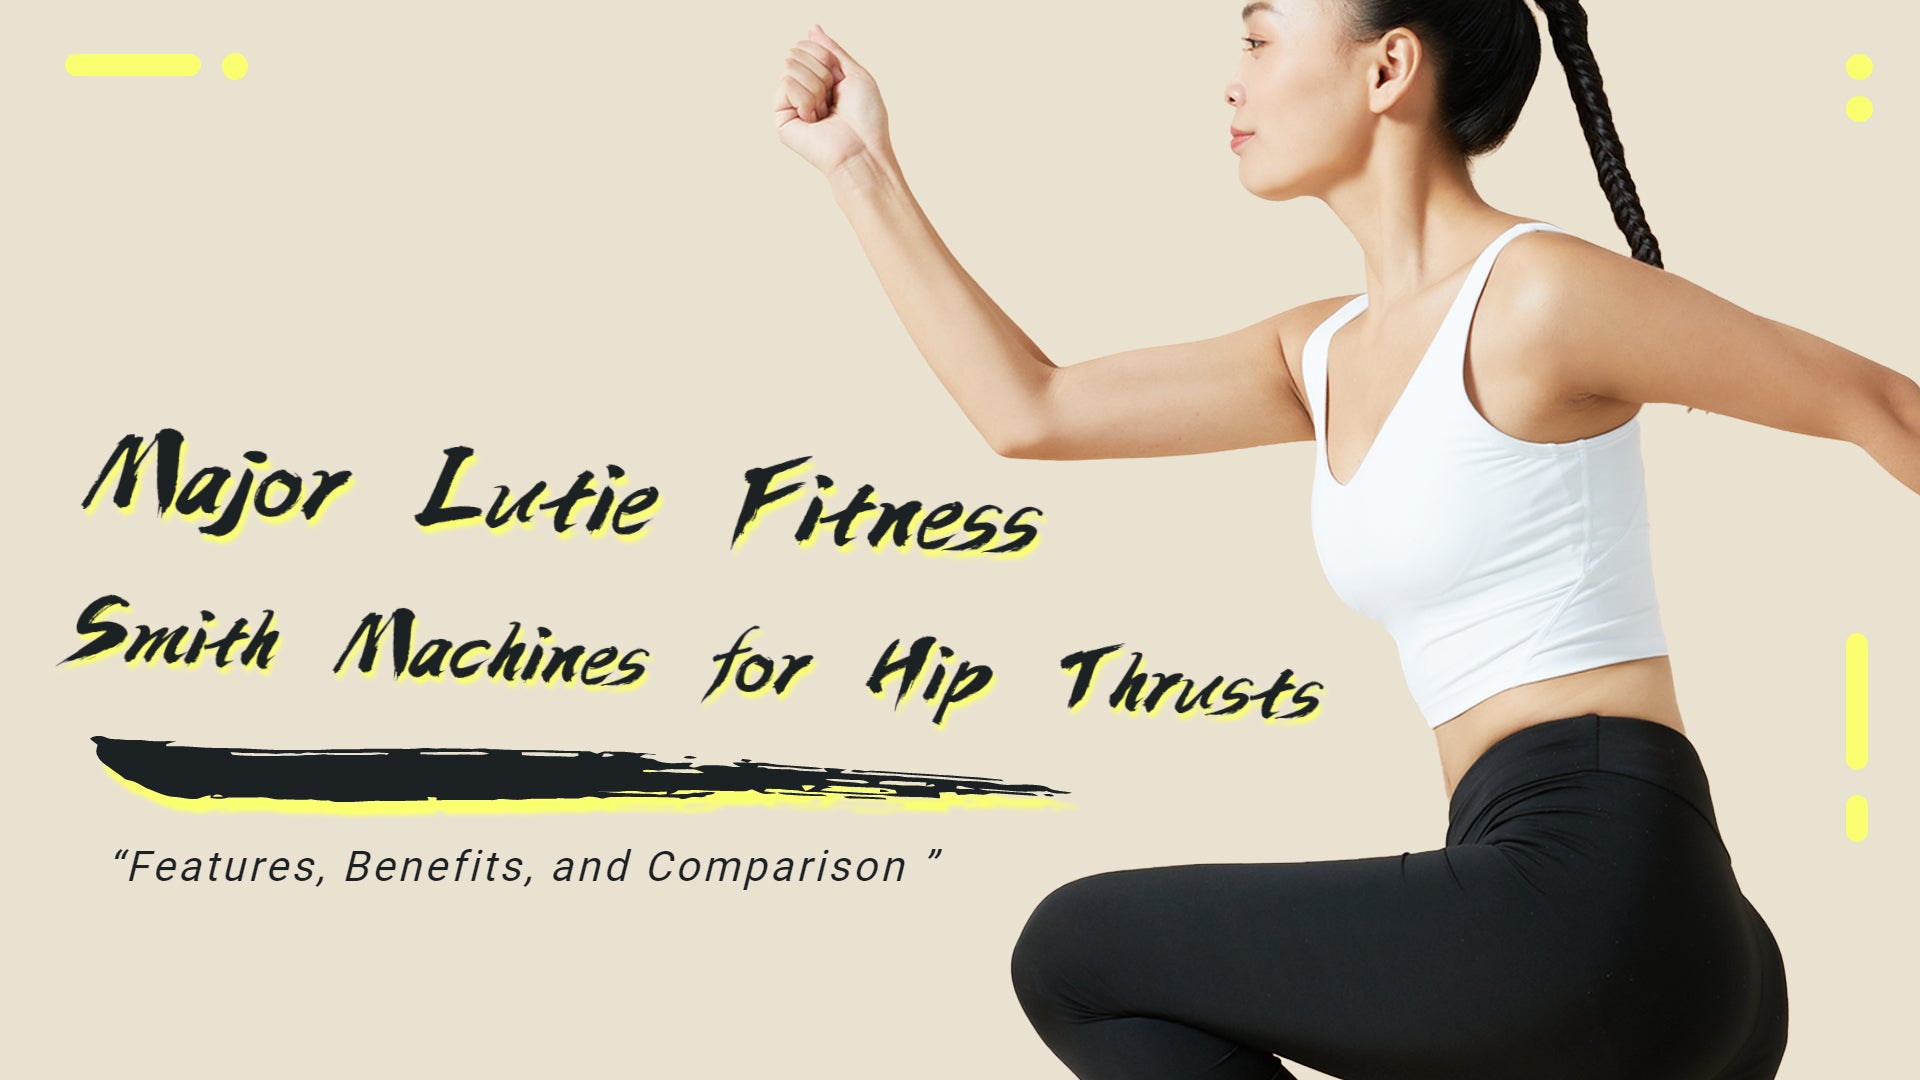 Major Lutie Fitness Smith Machines for Hip Thrusts: Features, Benefits, and Comparison with Other Brands